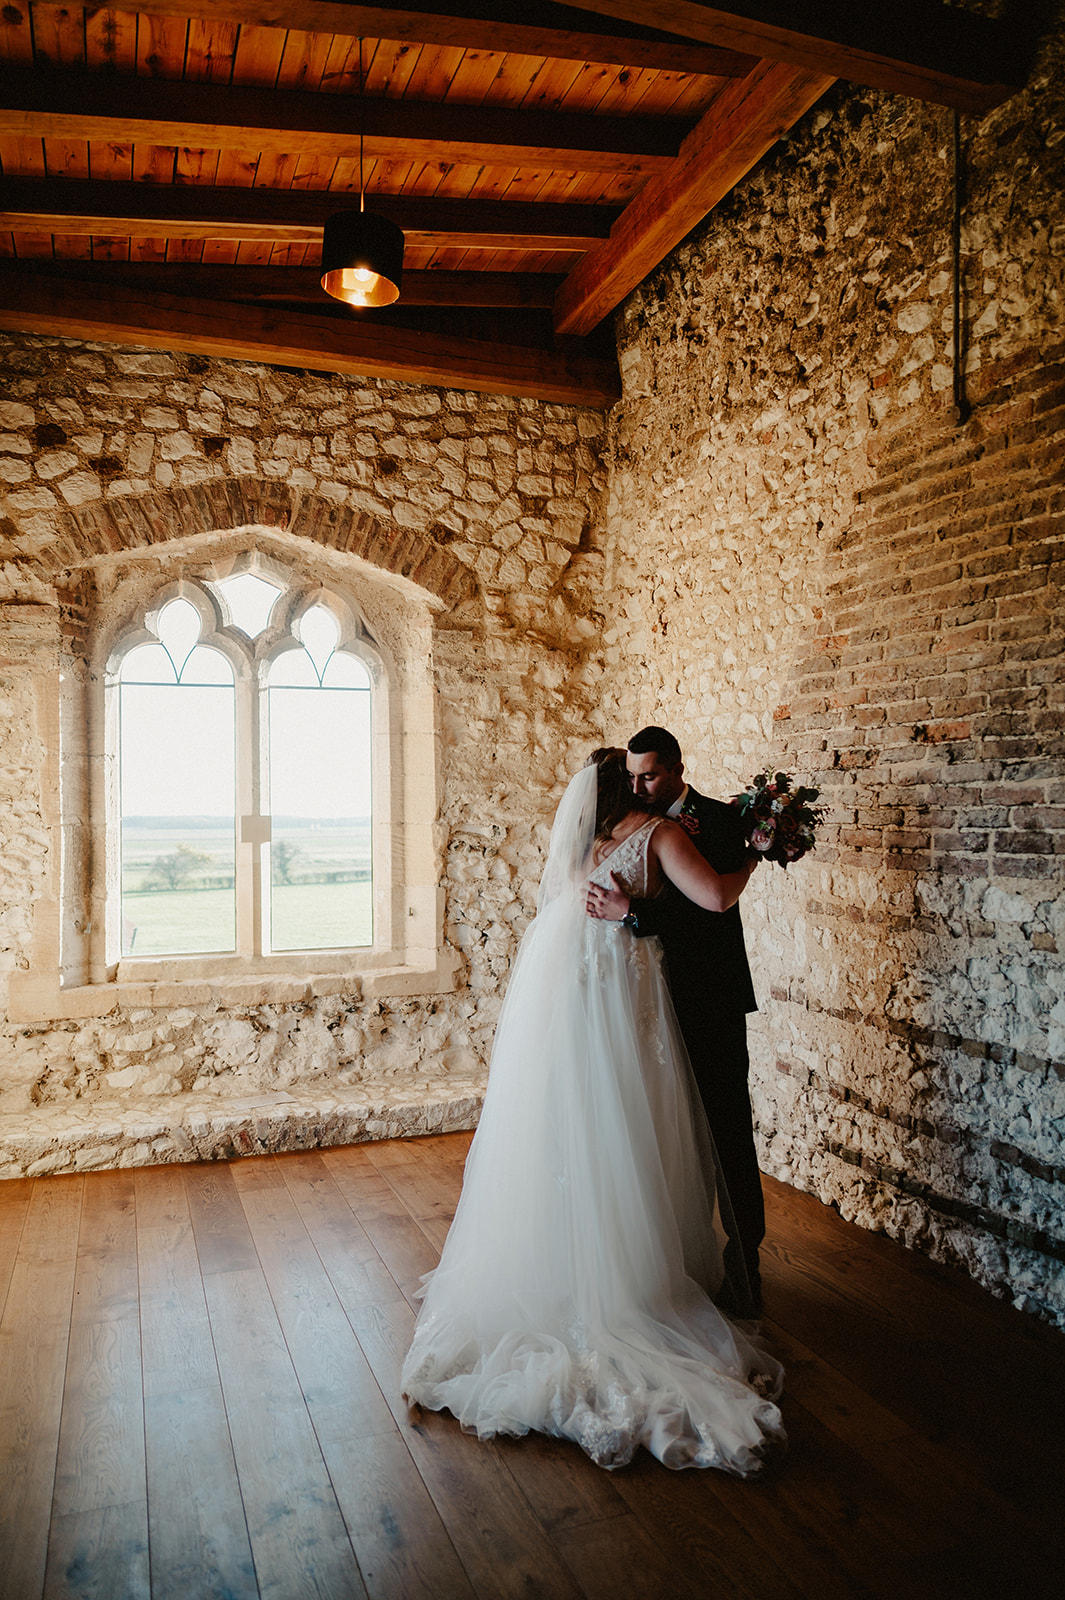 married couple share their first moments alone together at pentney abbey